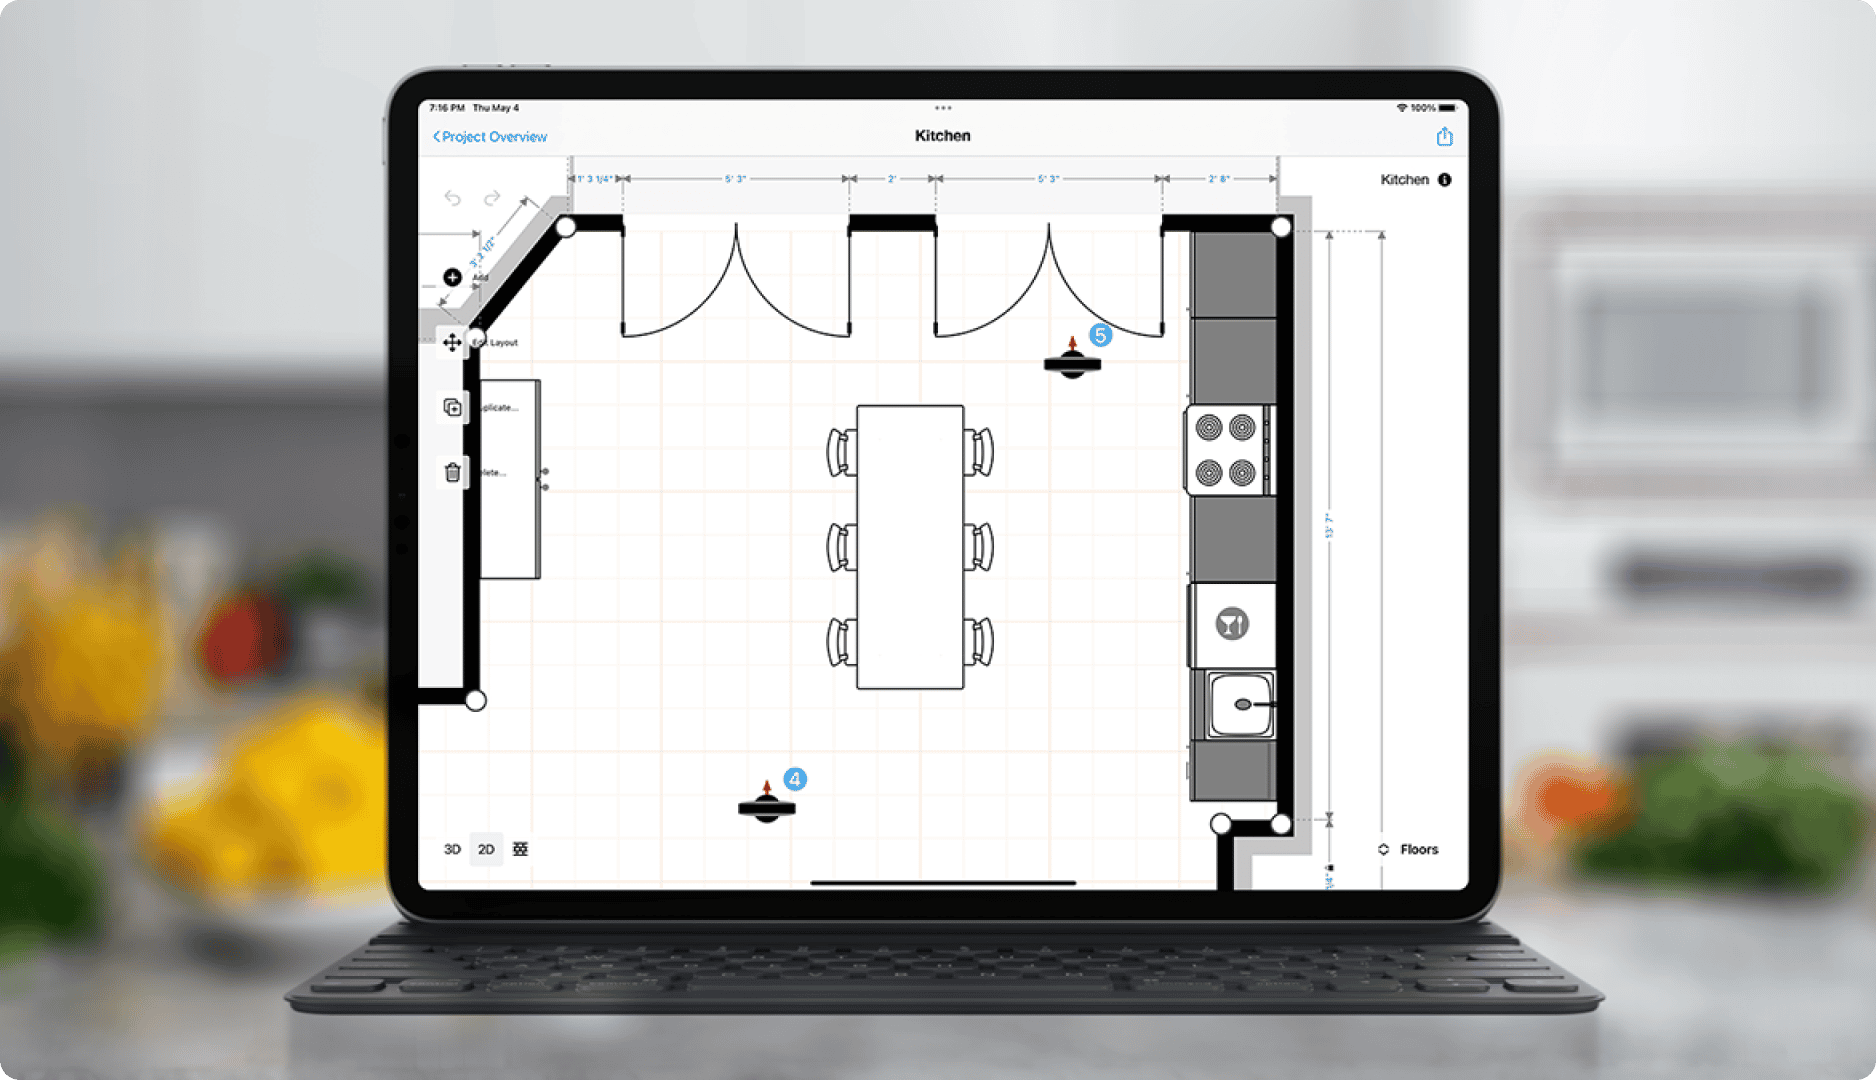 macbook pro with magicplan 2D floor plan project of a kitchen cabinets with dinning table